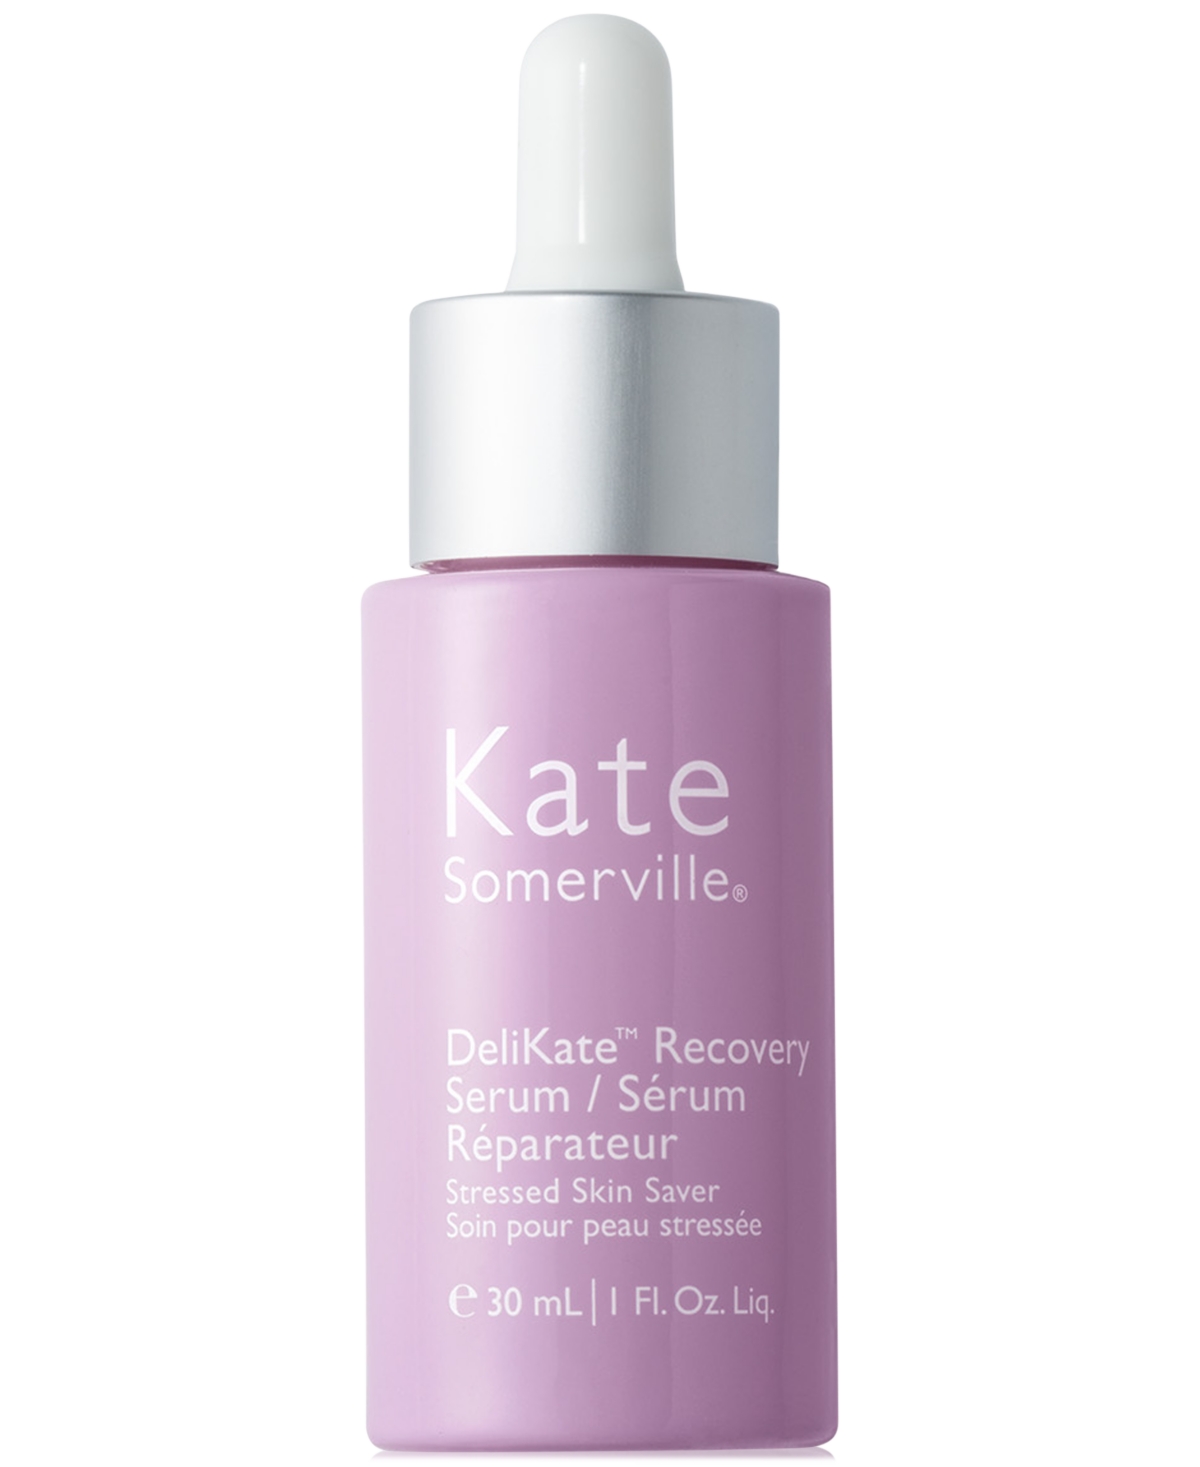 DeliKate Recovery Serum, 1 oz.